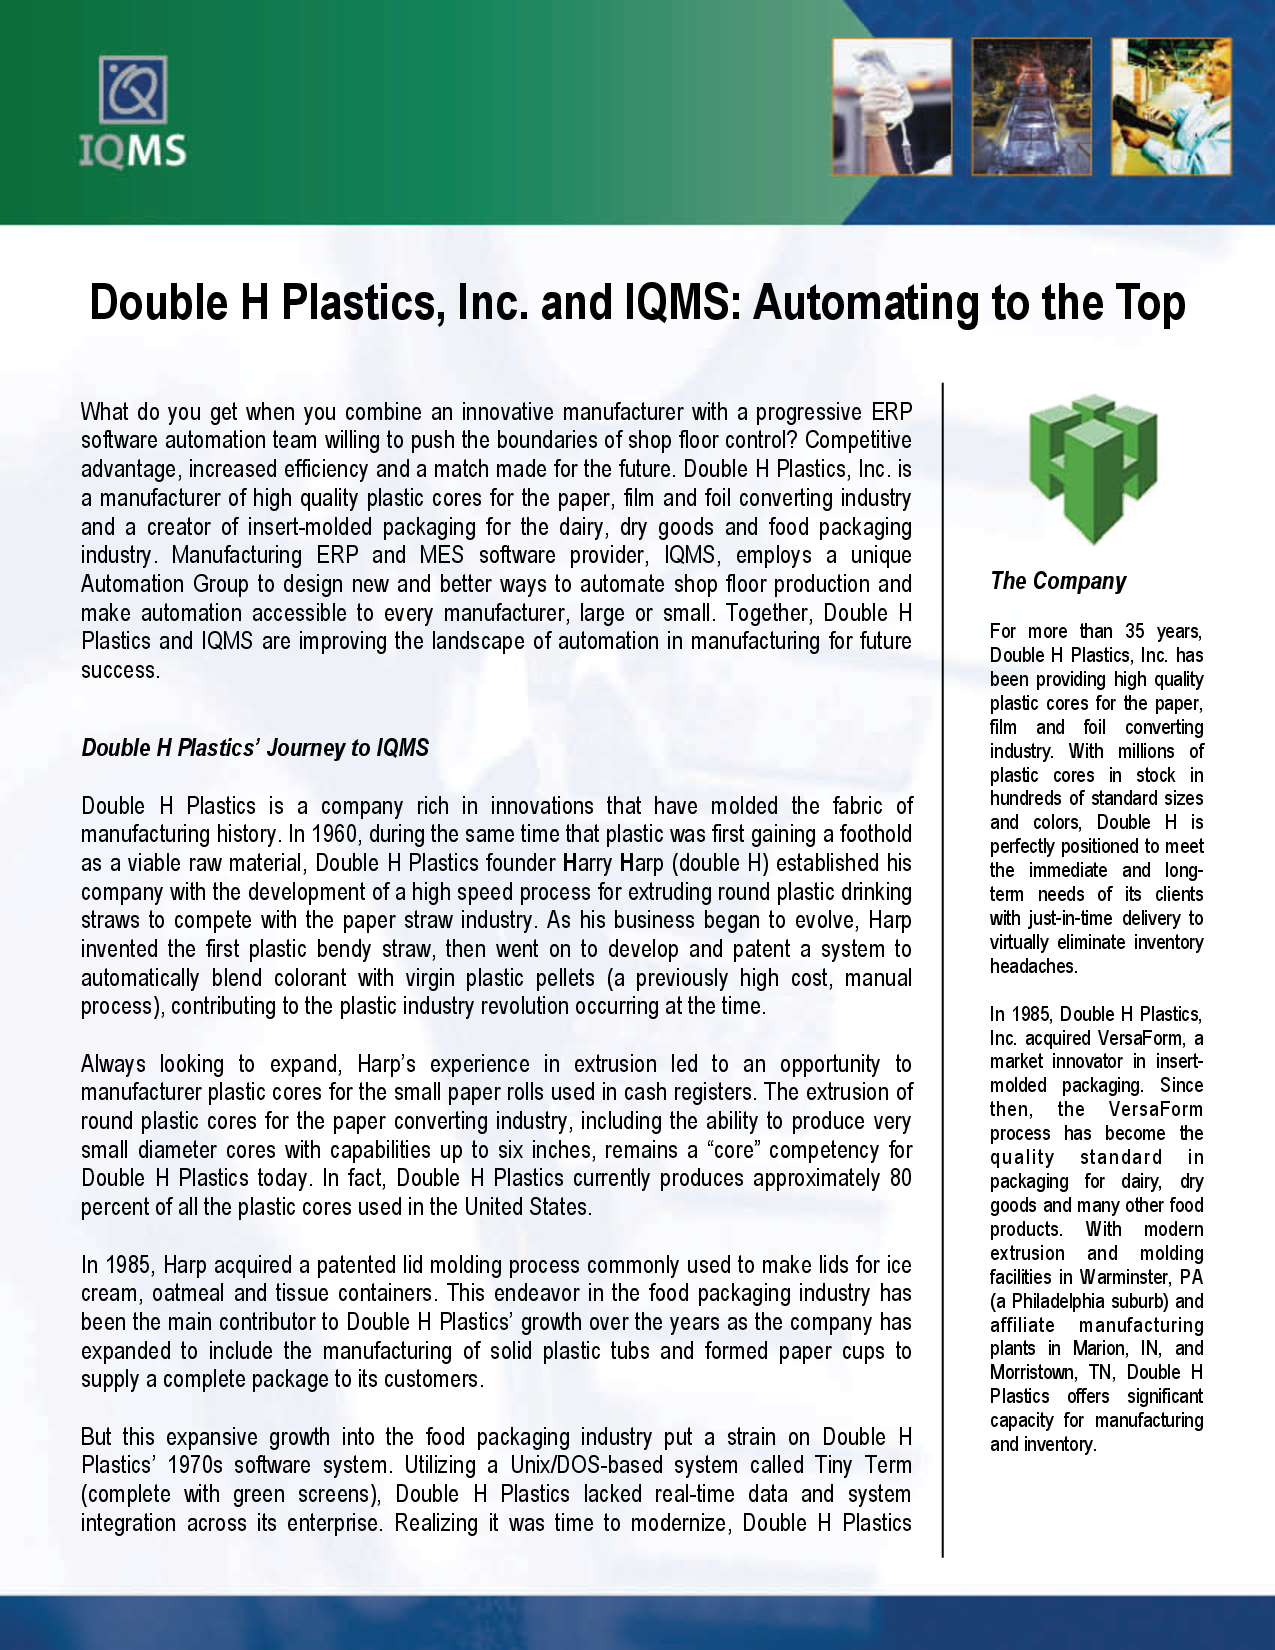 Double H Plastics, Inc. and IQMS: Automating to the Top